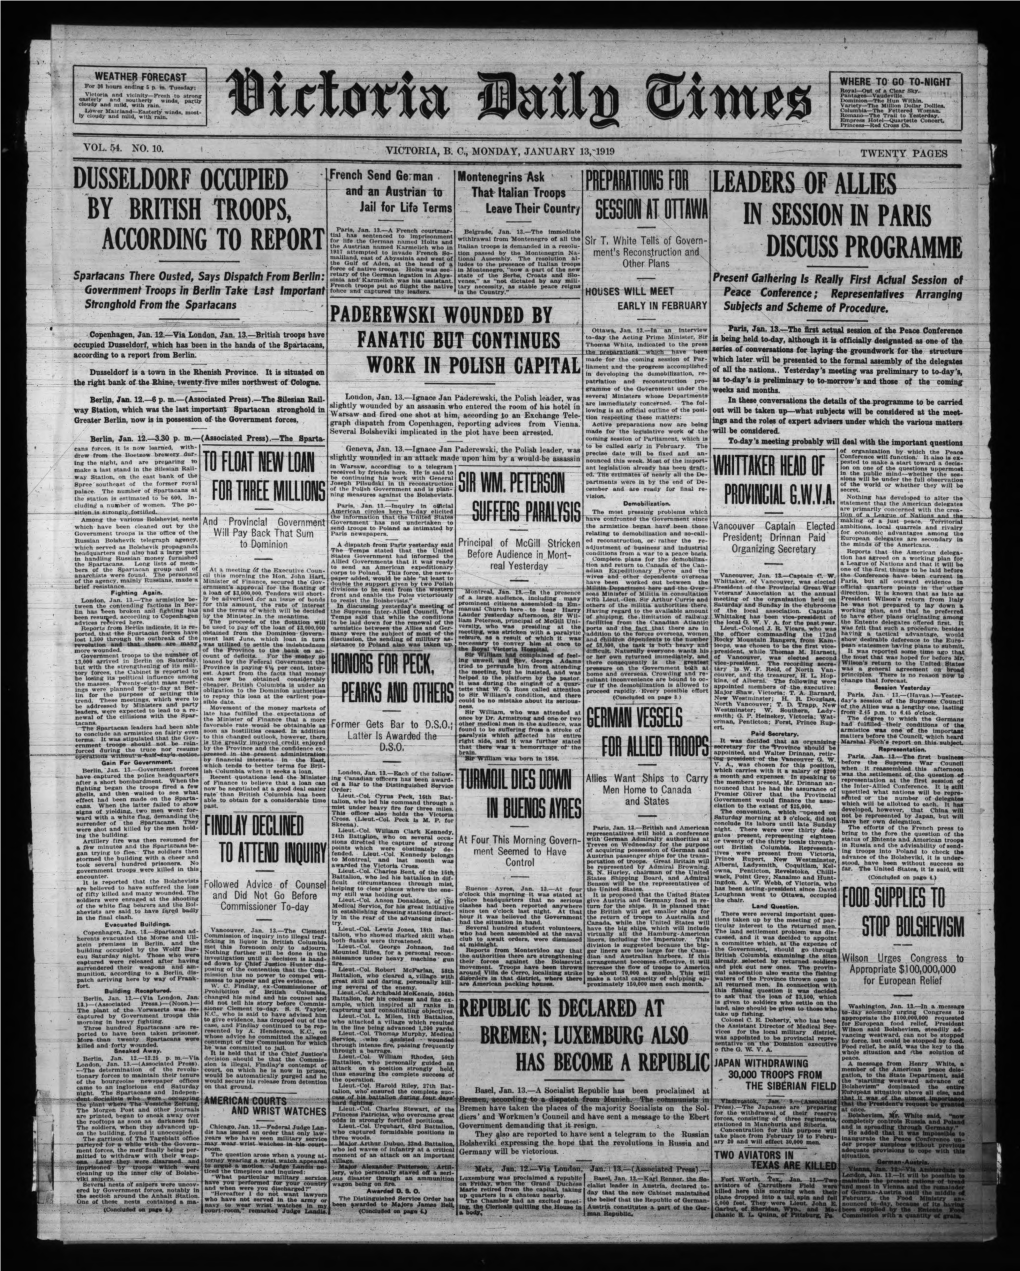 Victoria Daily Times, Monday, January 13, 1919 Gen